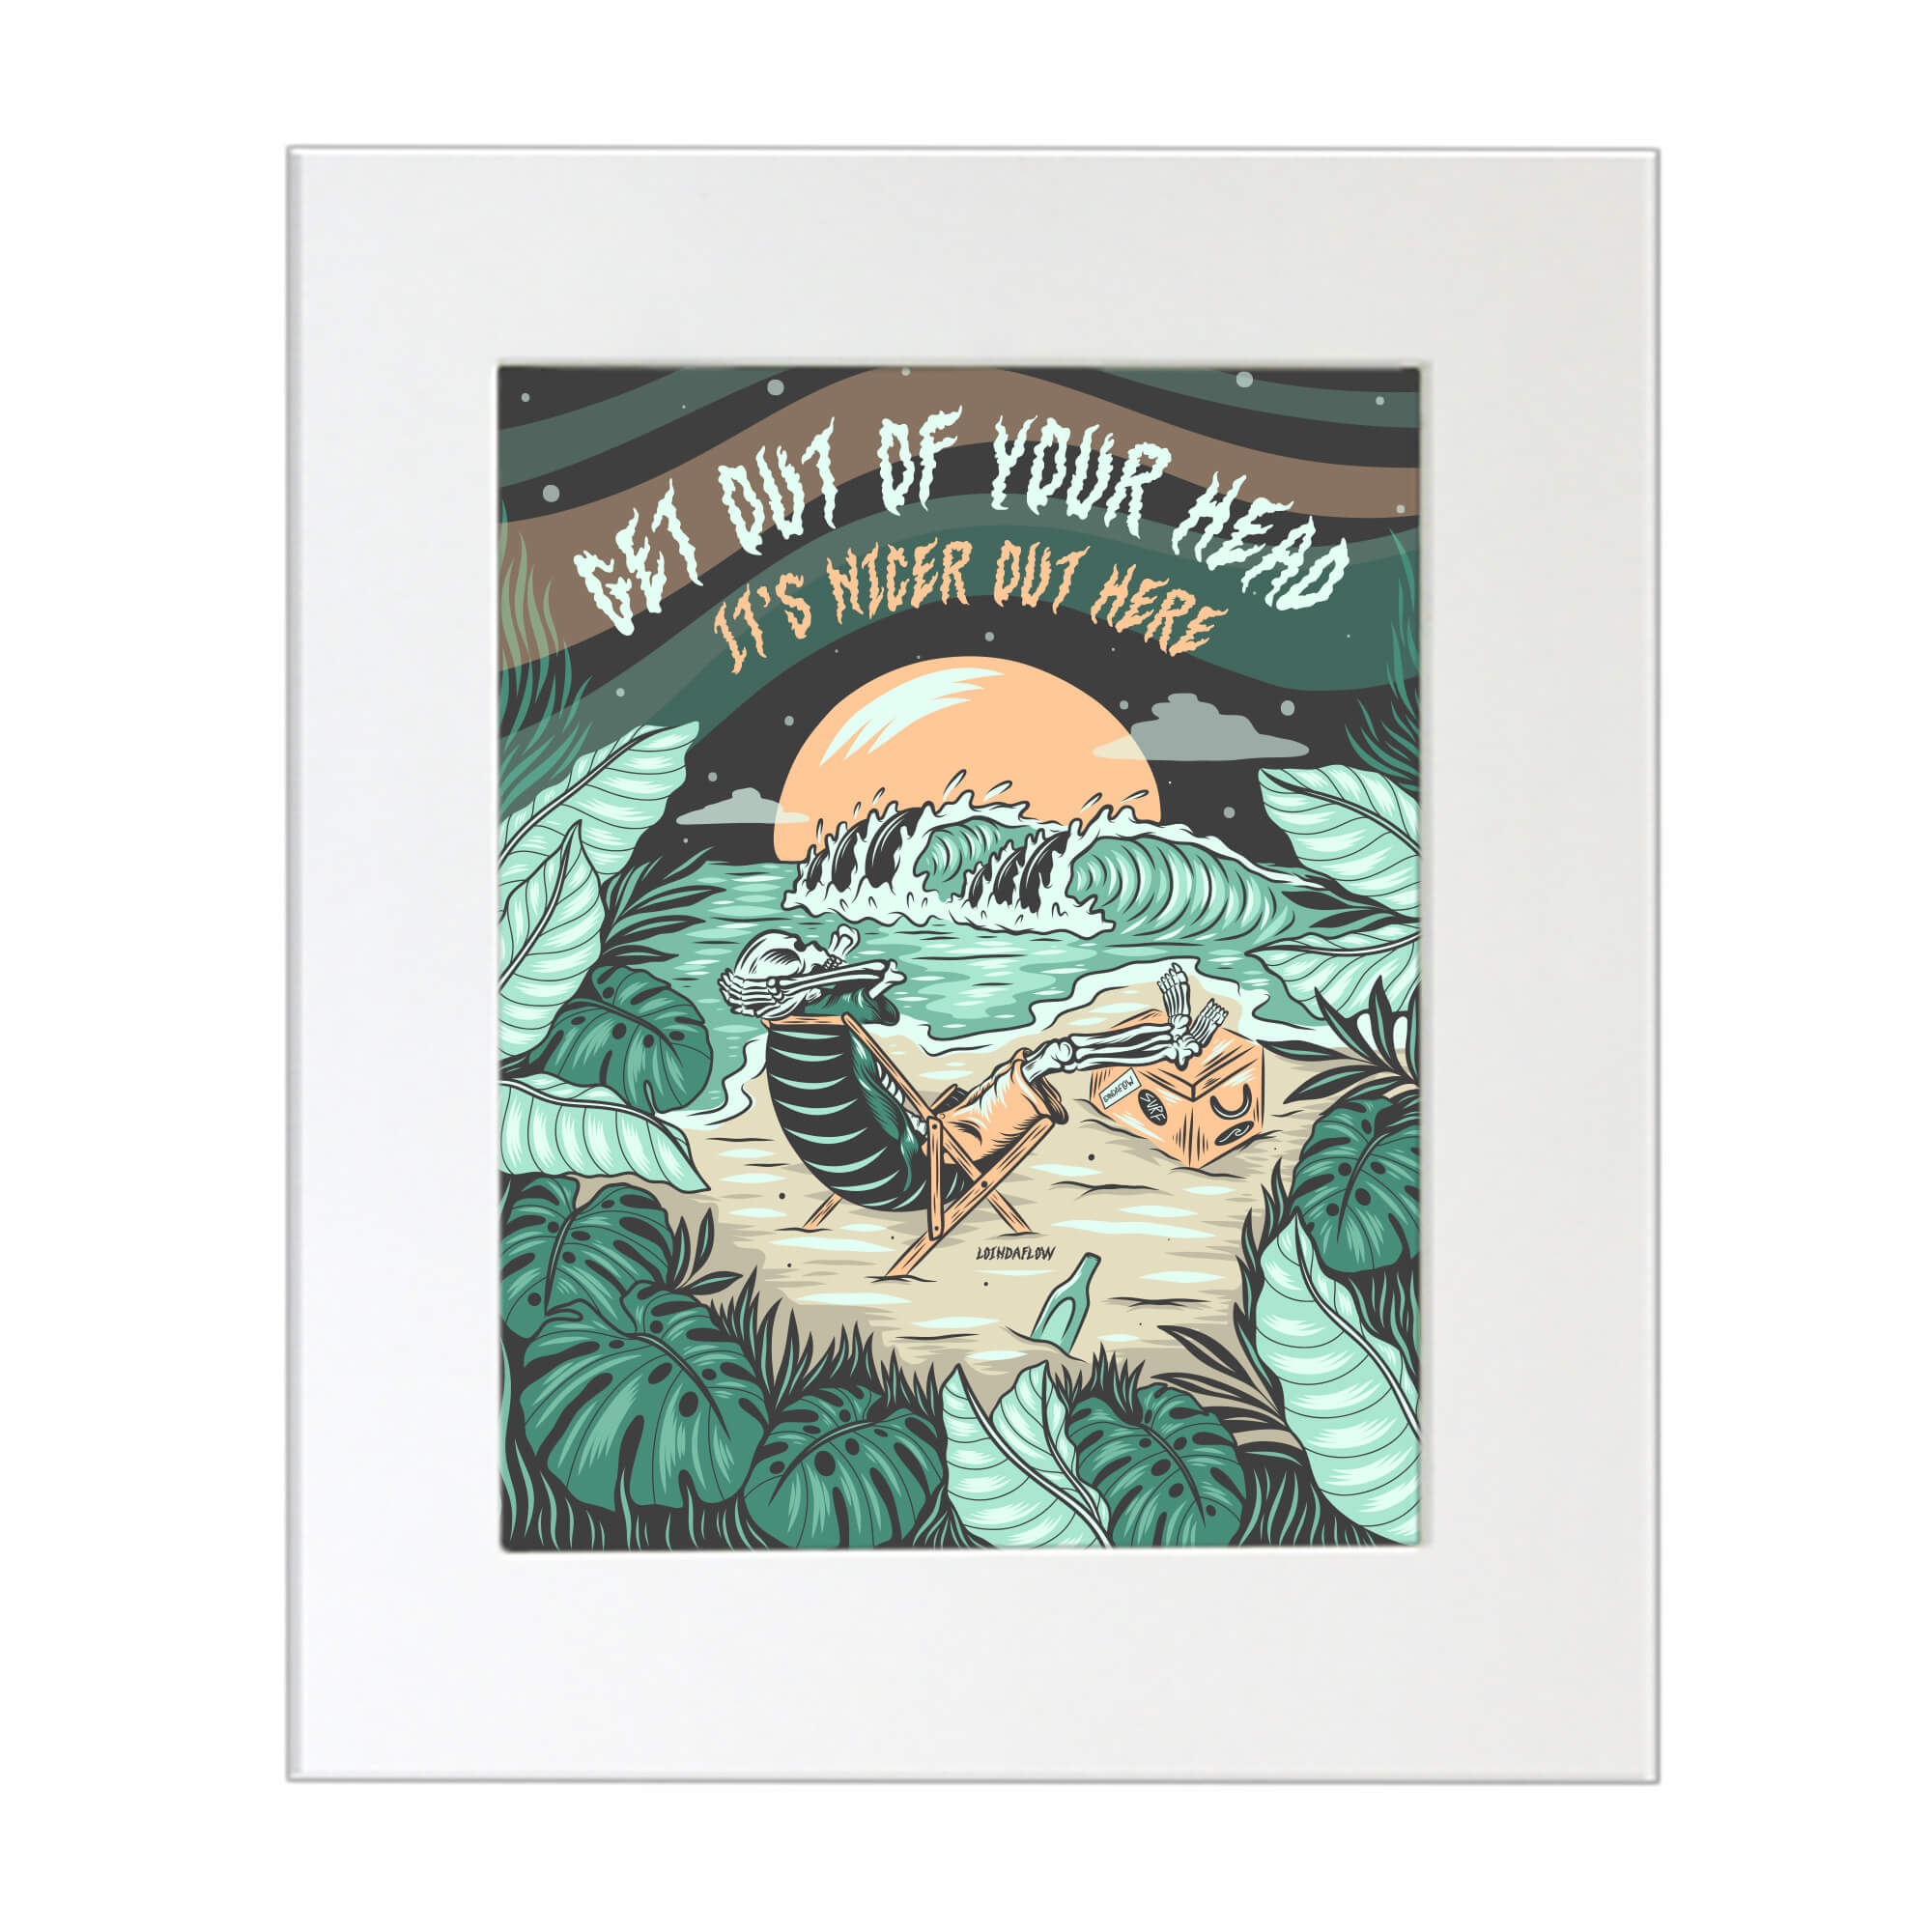 A matted art print of a skeleton chilling by the beach by hawaii artist Laihha Organna